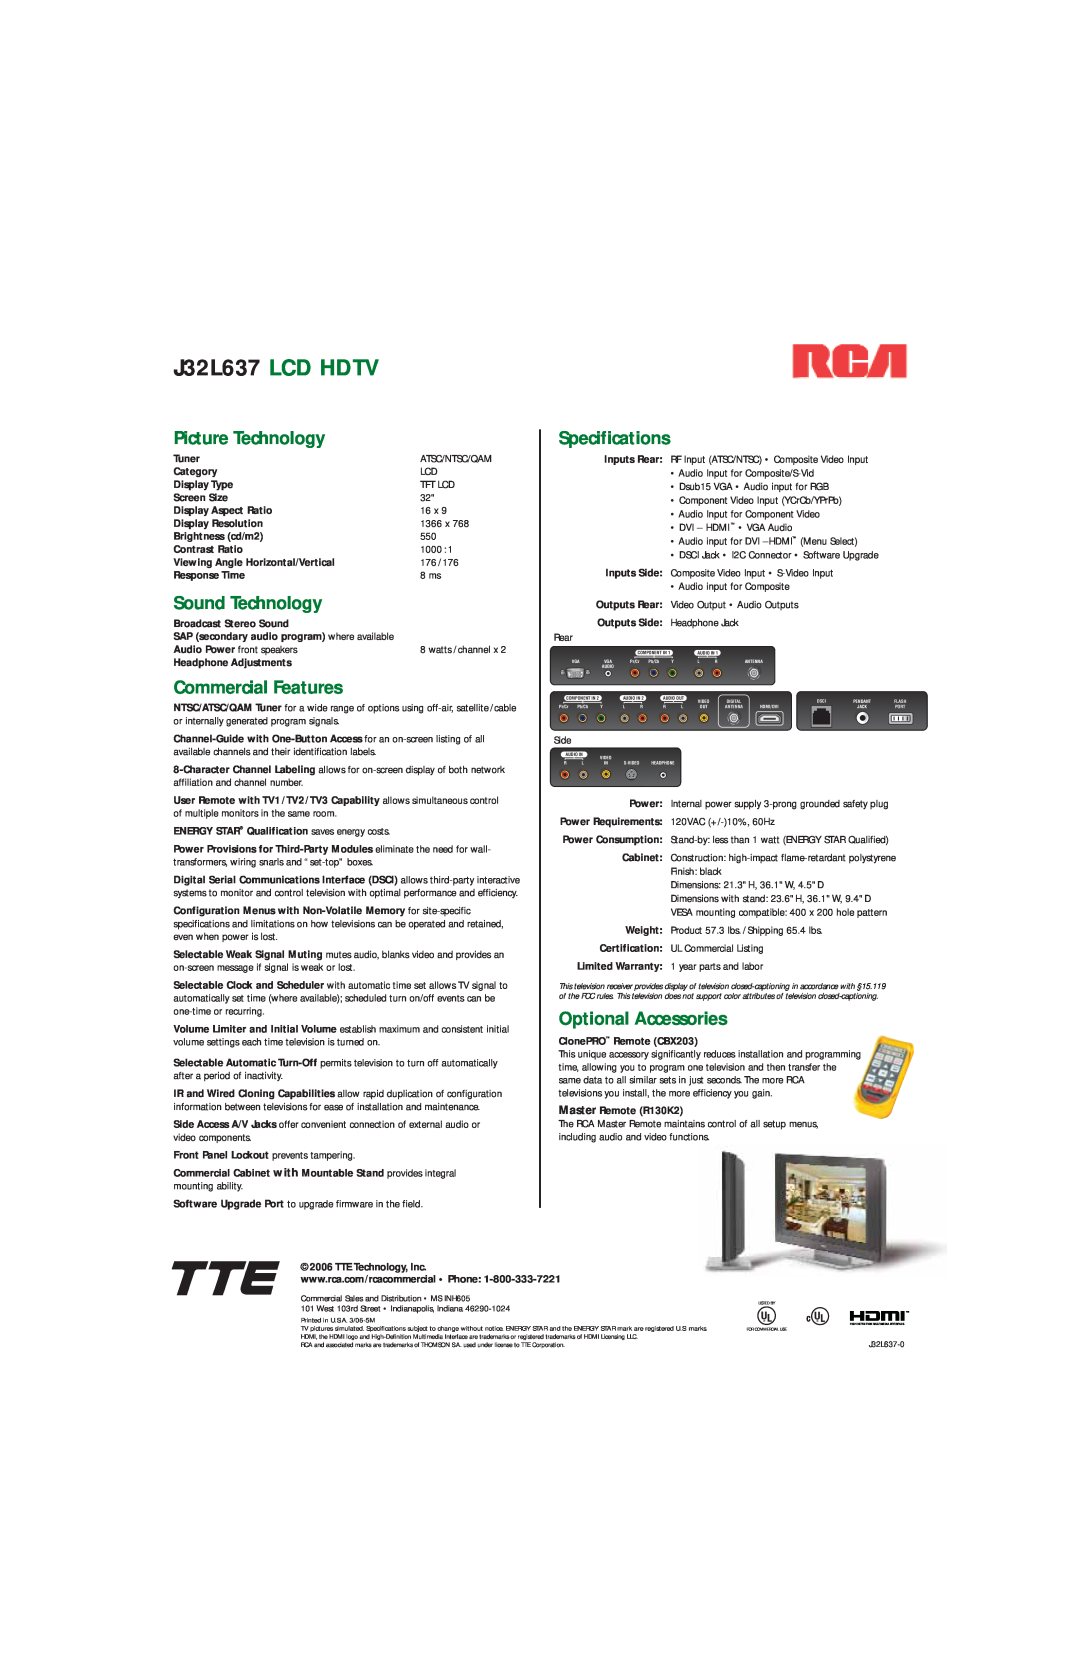 RCA J32L637L manual J32L637 LCD HDTV, Picture Technology, Sound Technology, Commercial Features, Specifications 